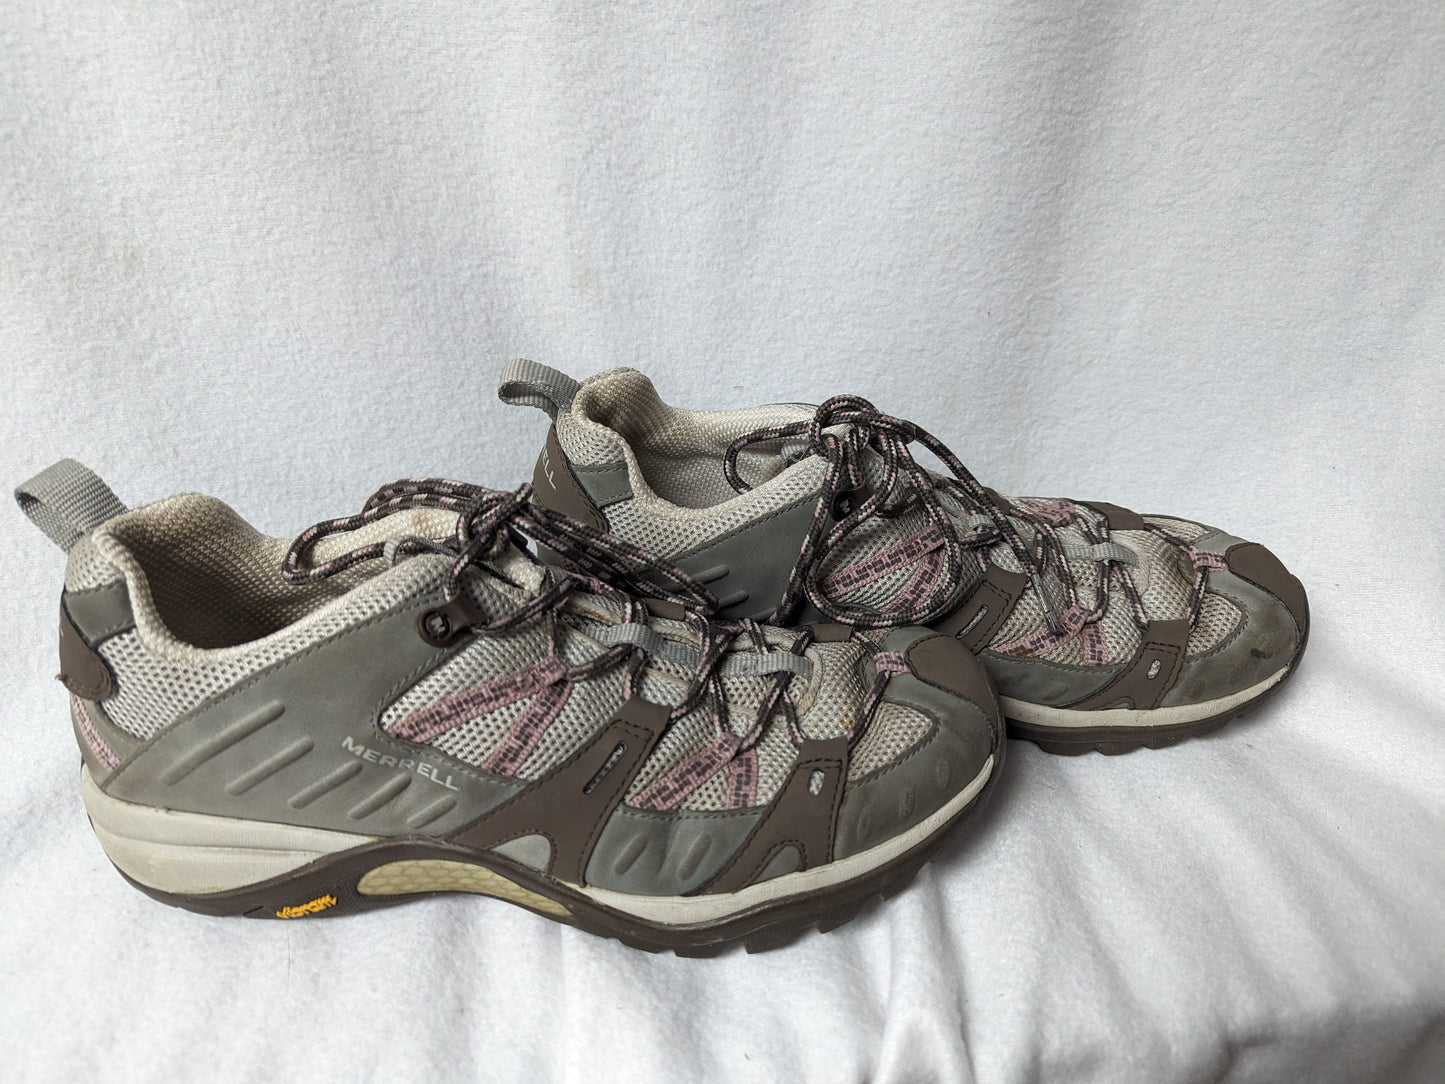 Merrell Hiking Shoes Size 10 Color Gray Condition Used